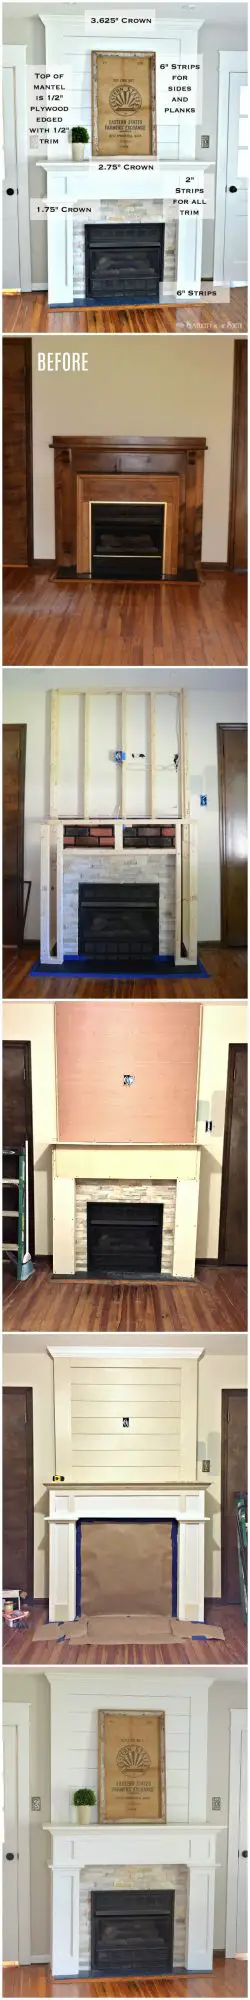 Such an easy way to do a DIY farmhouse style fireplace makeover on a budget with shiplap above the mantle and using stone tile and ply wood